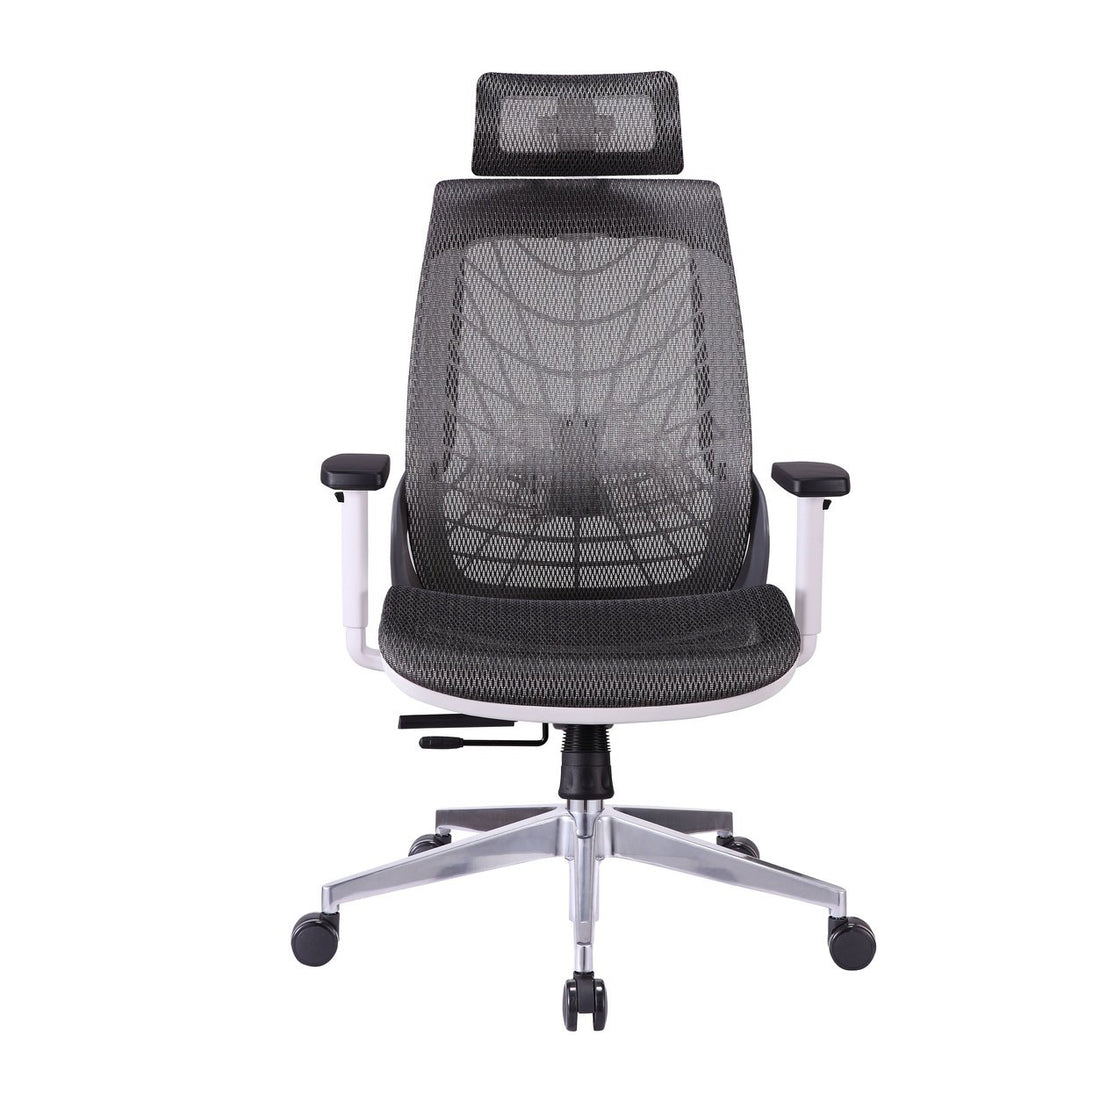 Spider Luxury Mesh High Back Chair FC